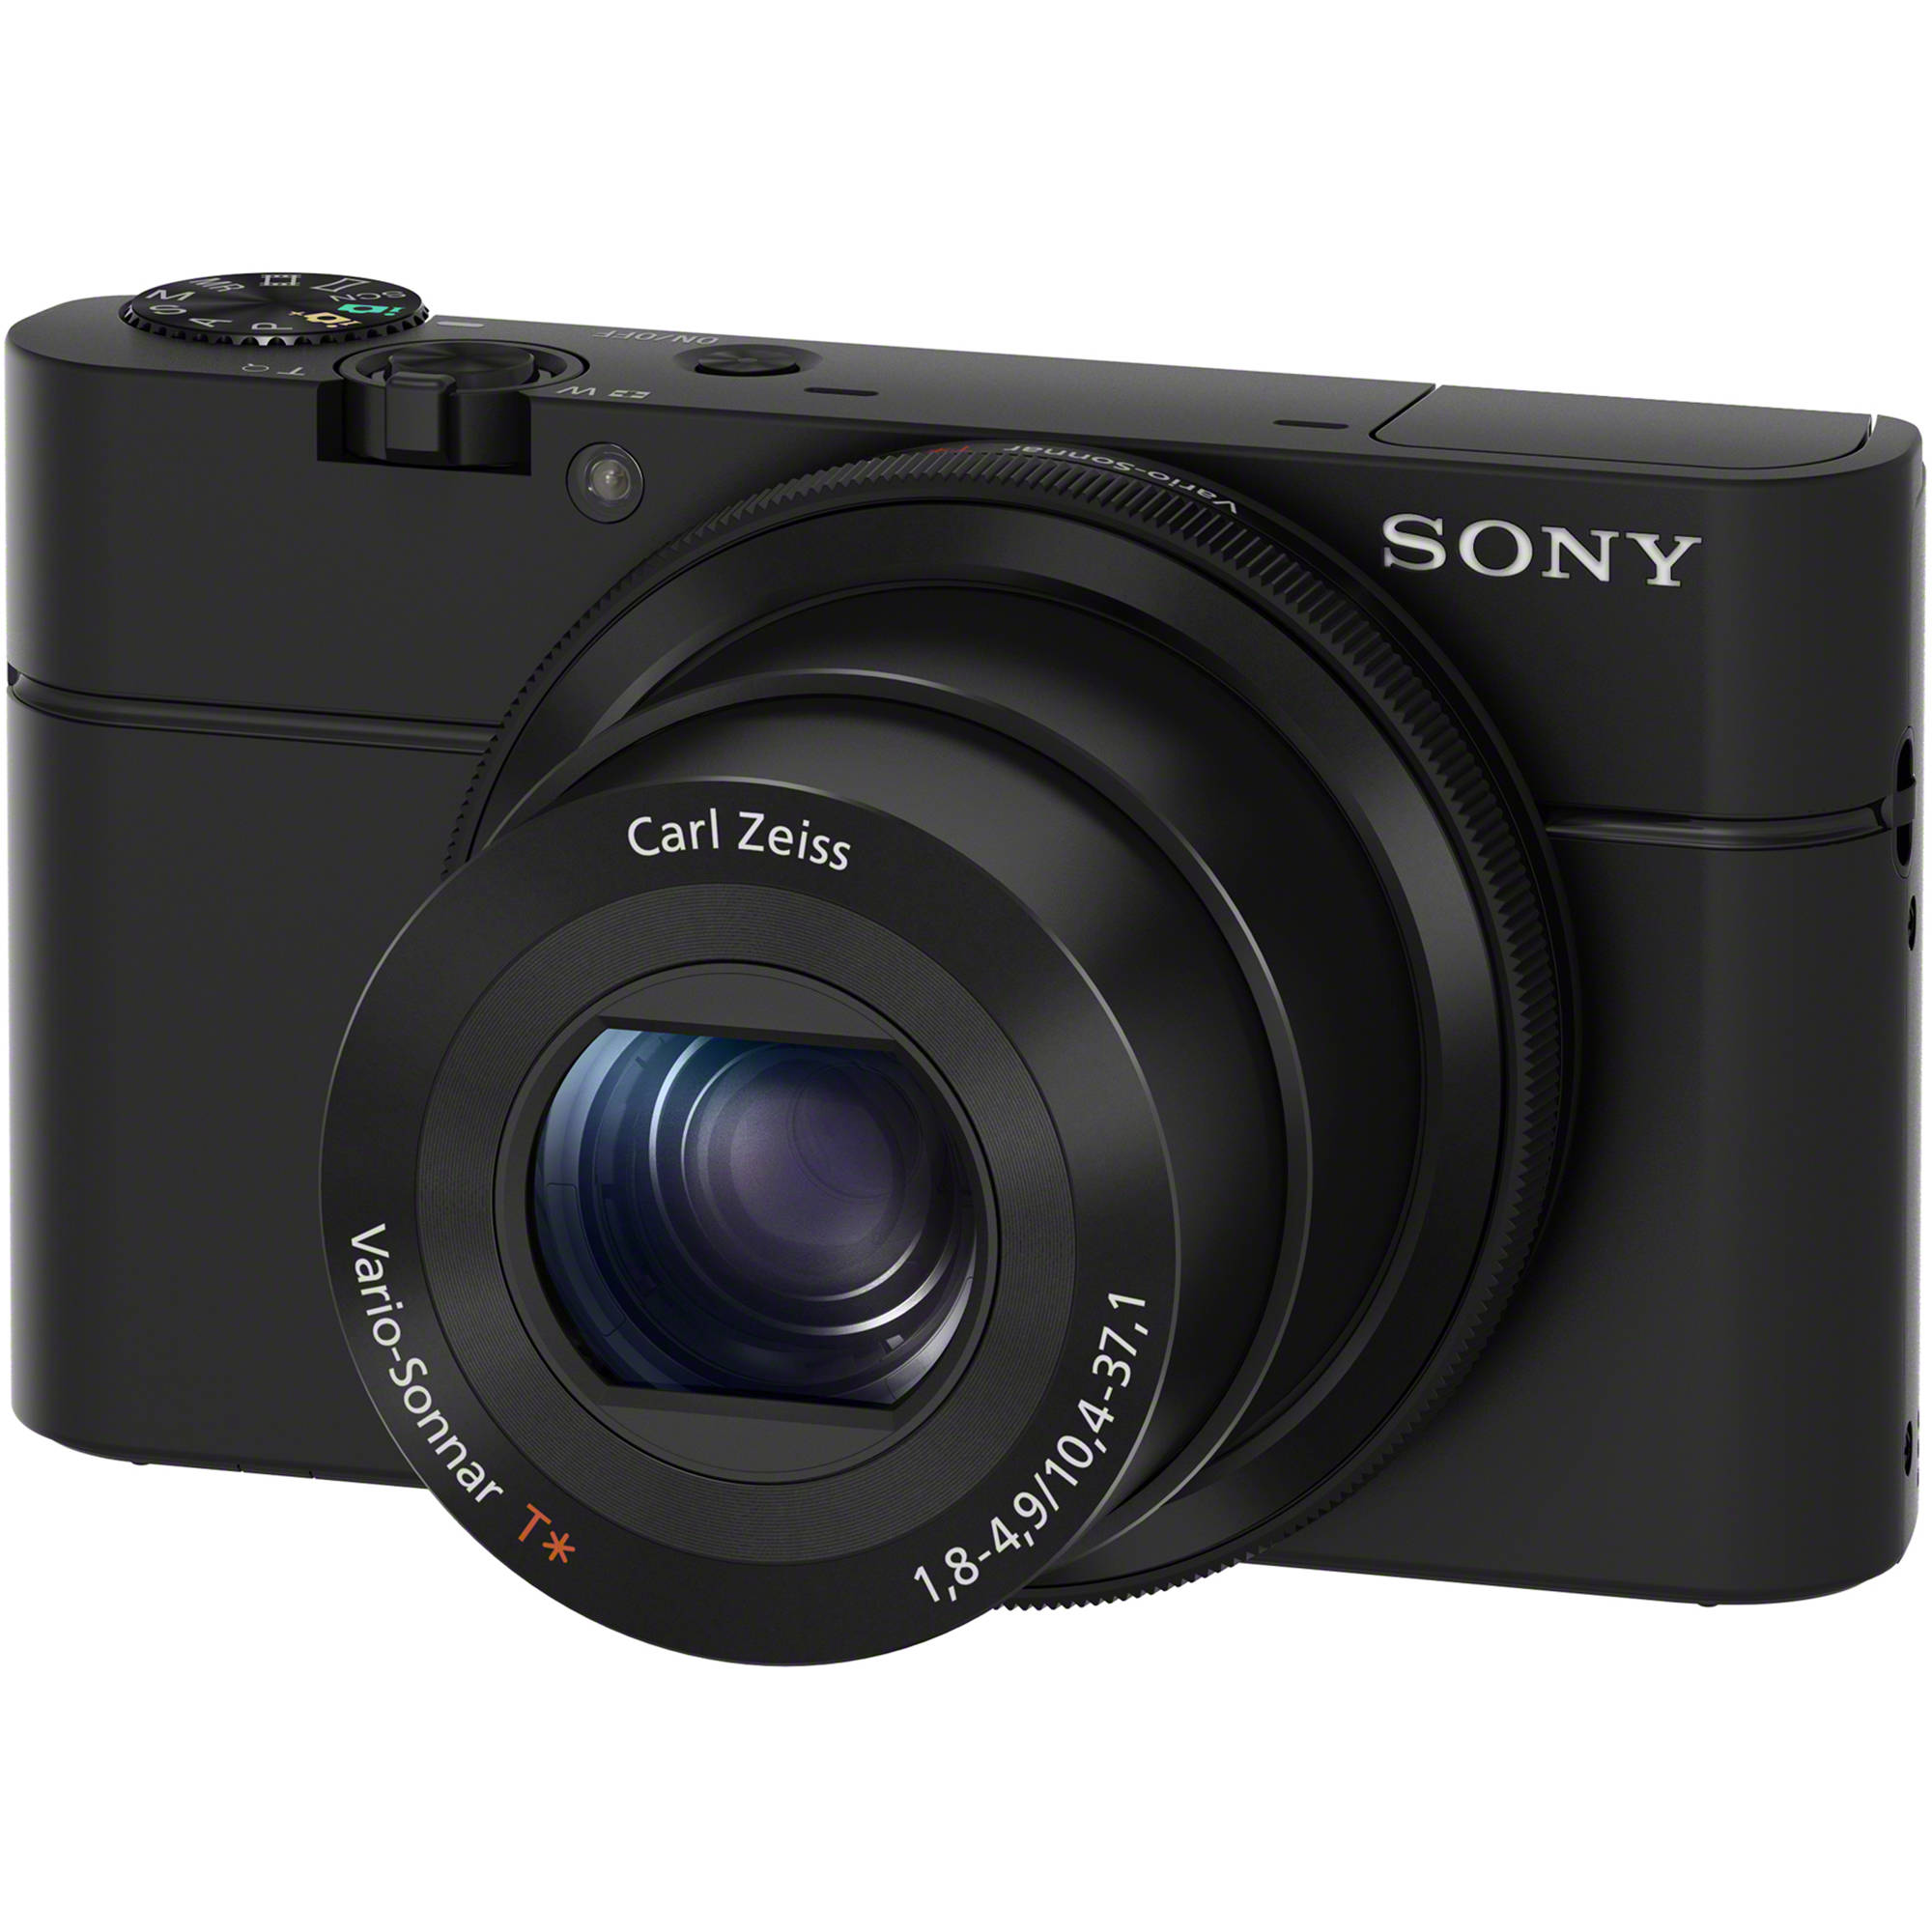 SONY CARL ZEISS VARIO SONNAR DRIVER FOR MAC